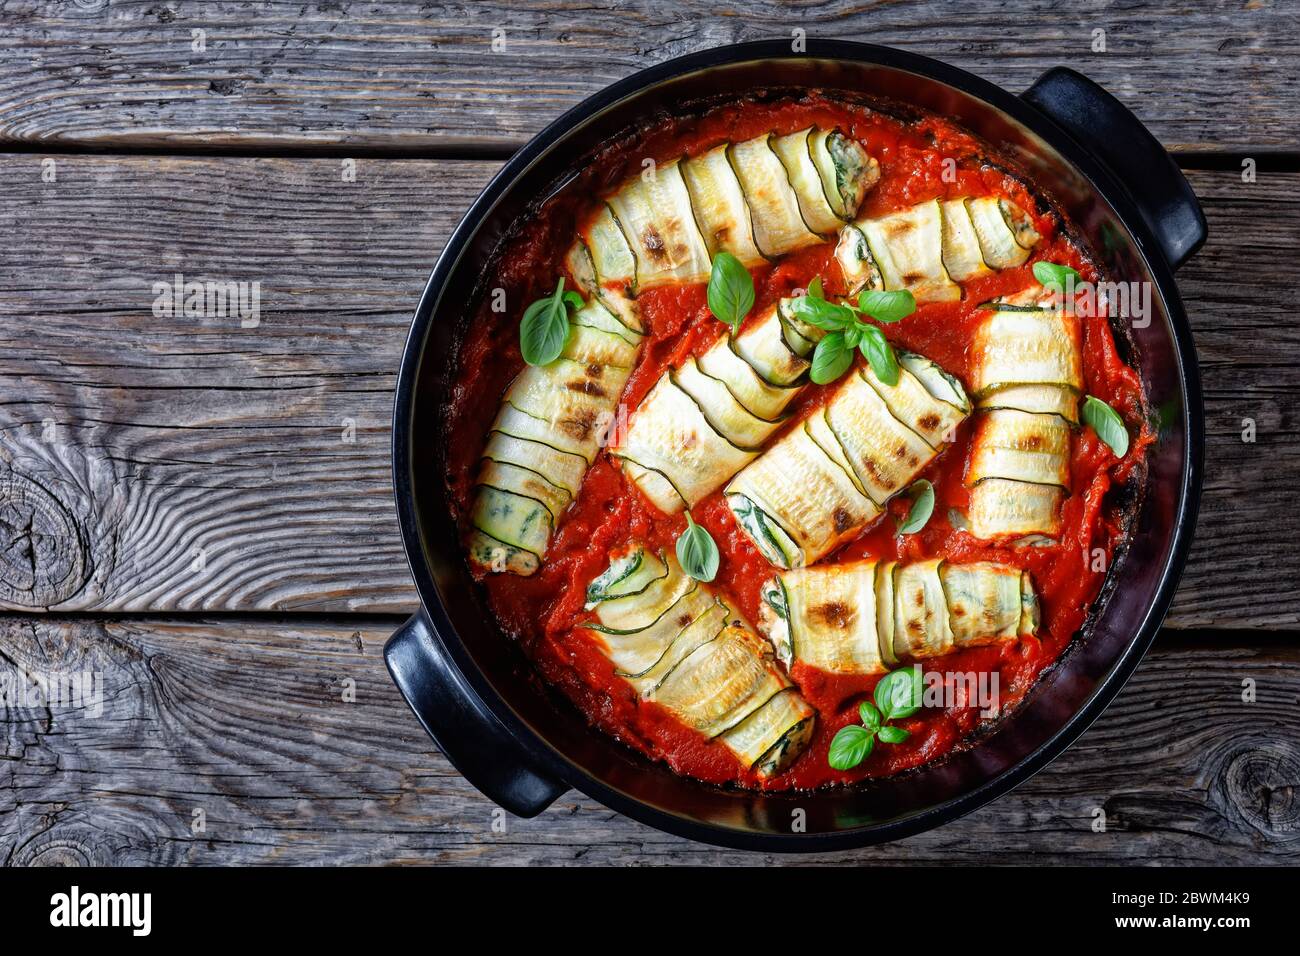 Zucchini roll-ups stuffed with fresh italian ricotta with spinach and basil leaves, garlic baked in tomato sauce, served on a black baking dish on rus Stock Photo